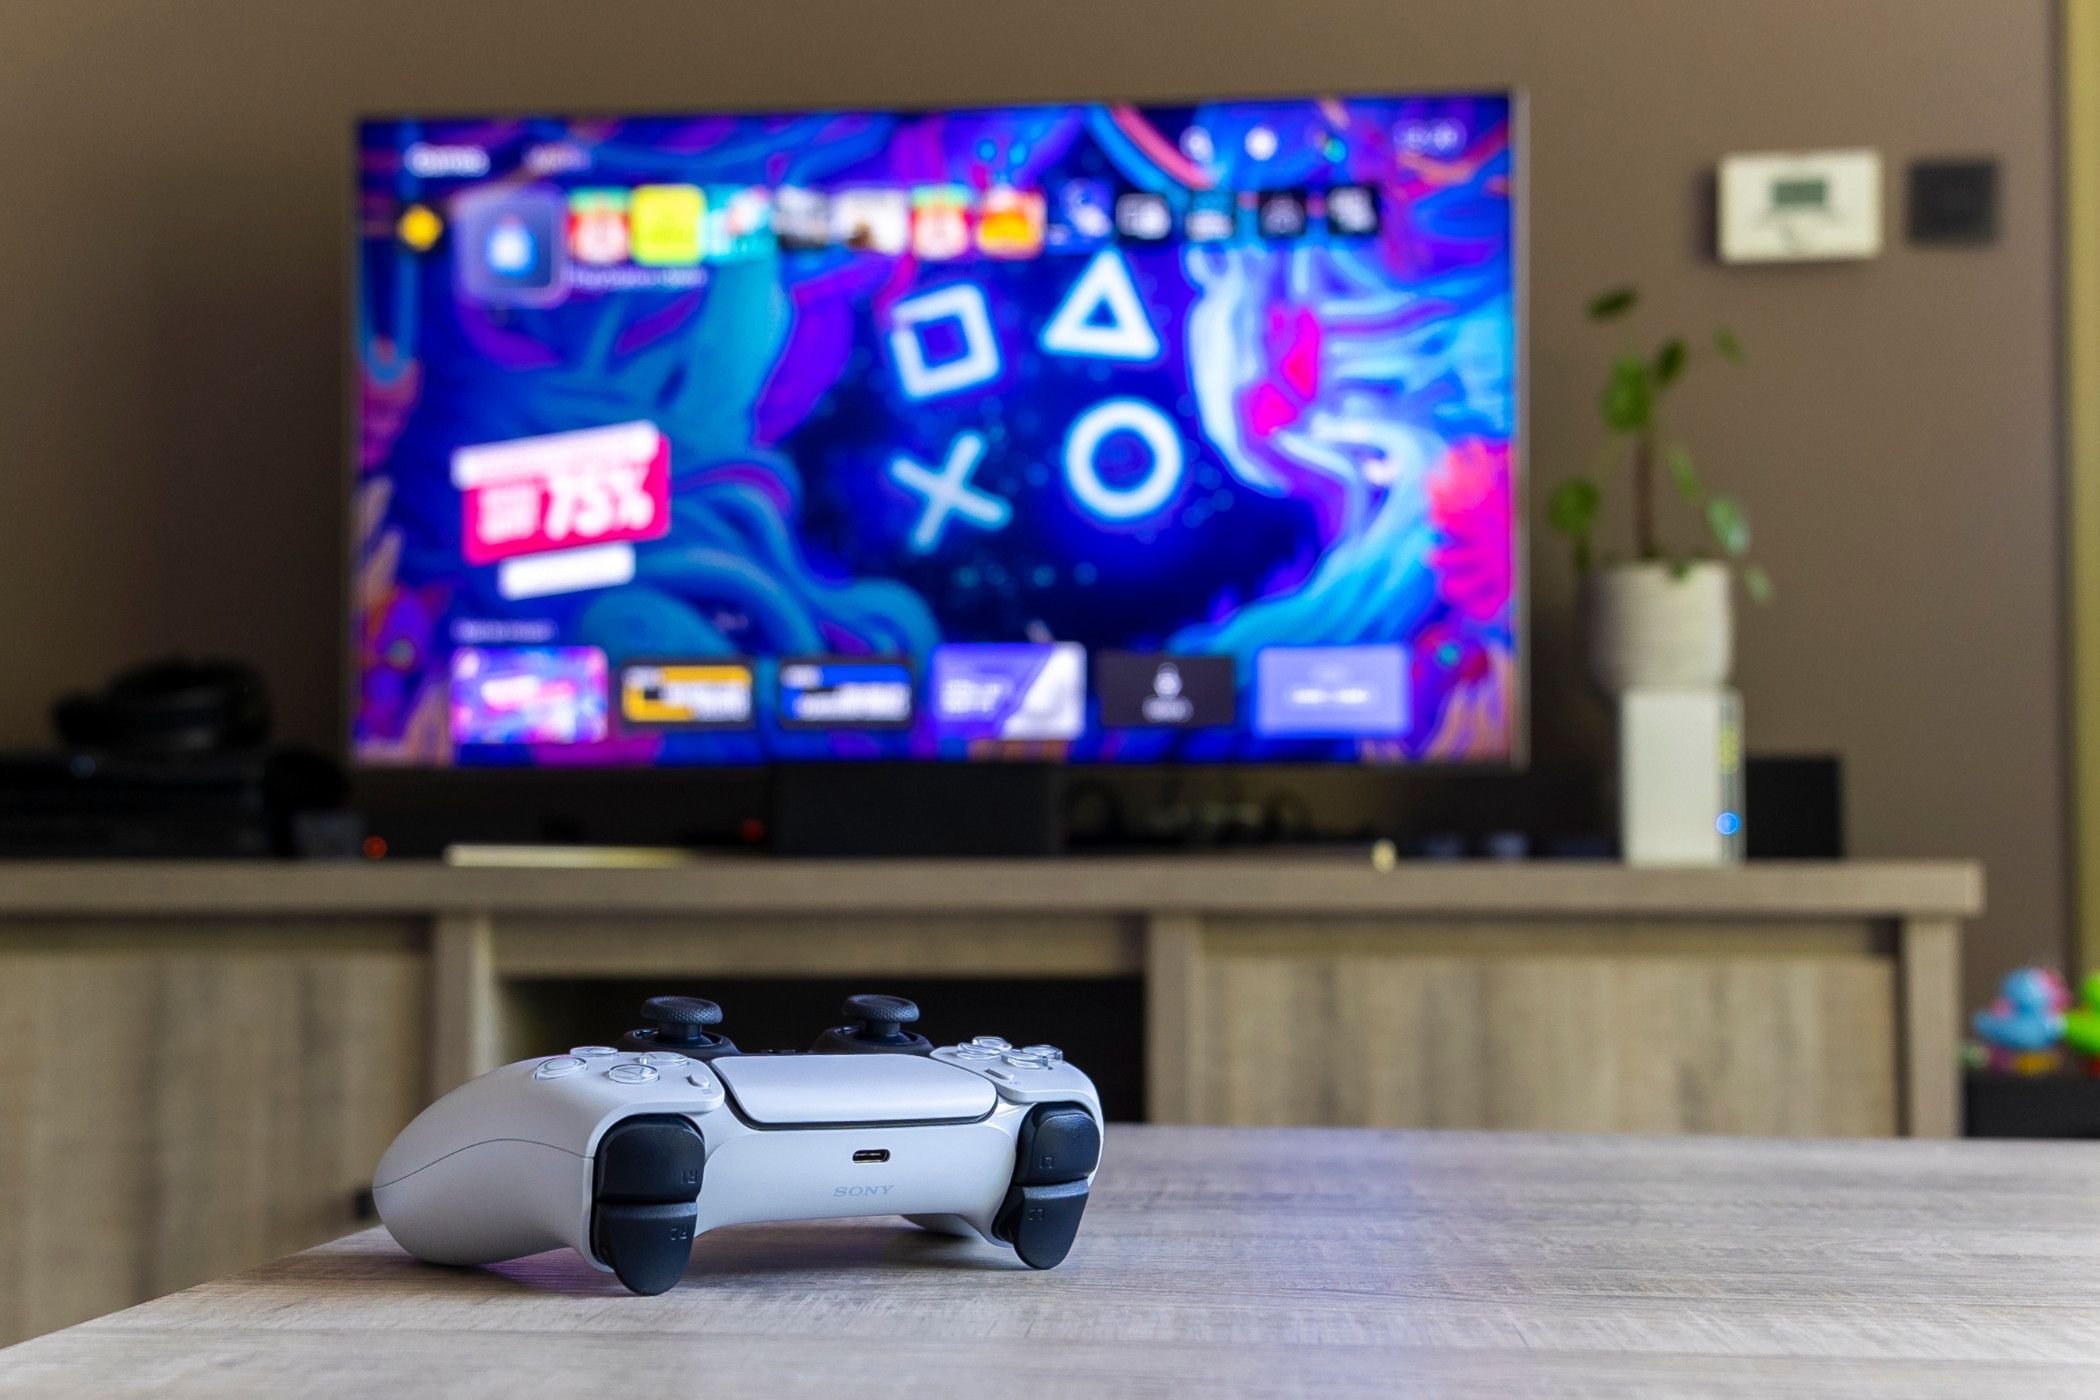 PlayStation 5 DualSense controller sitting on a coffee table in front of a TV.